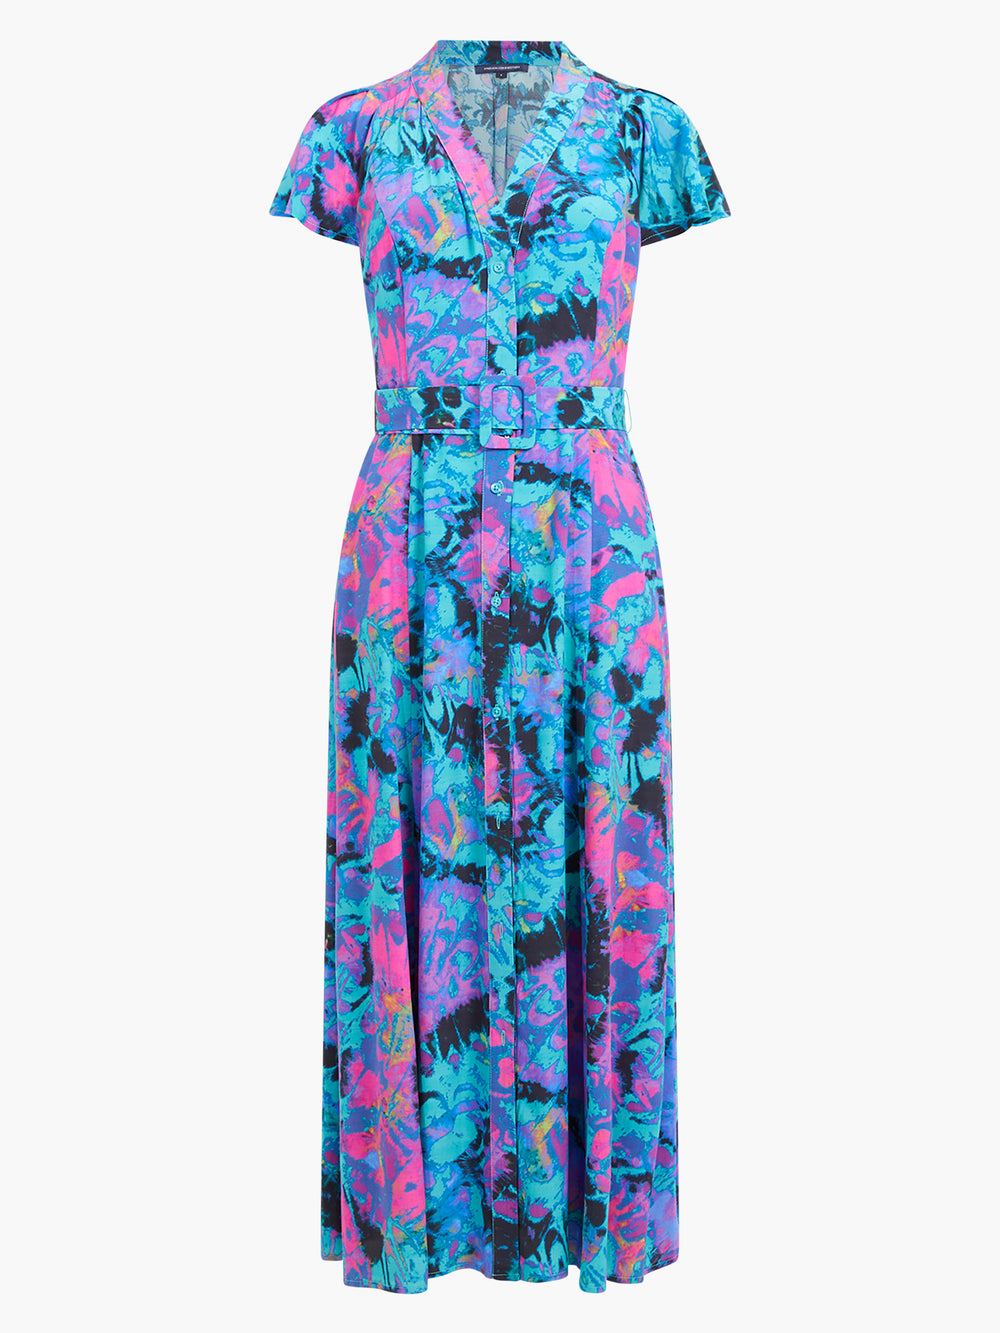 Gabriella Eco Delphine Dress Jaded Teal | French Connection UK